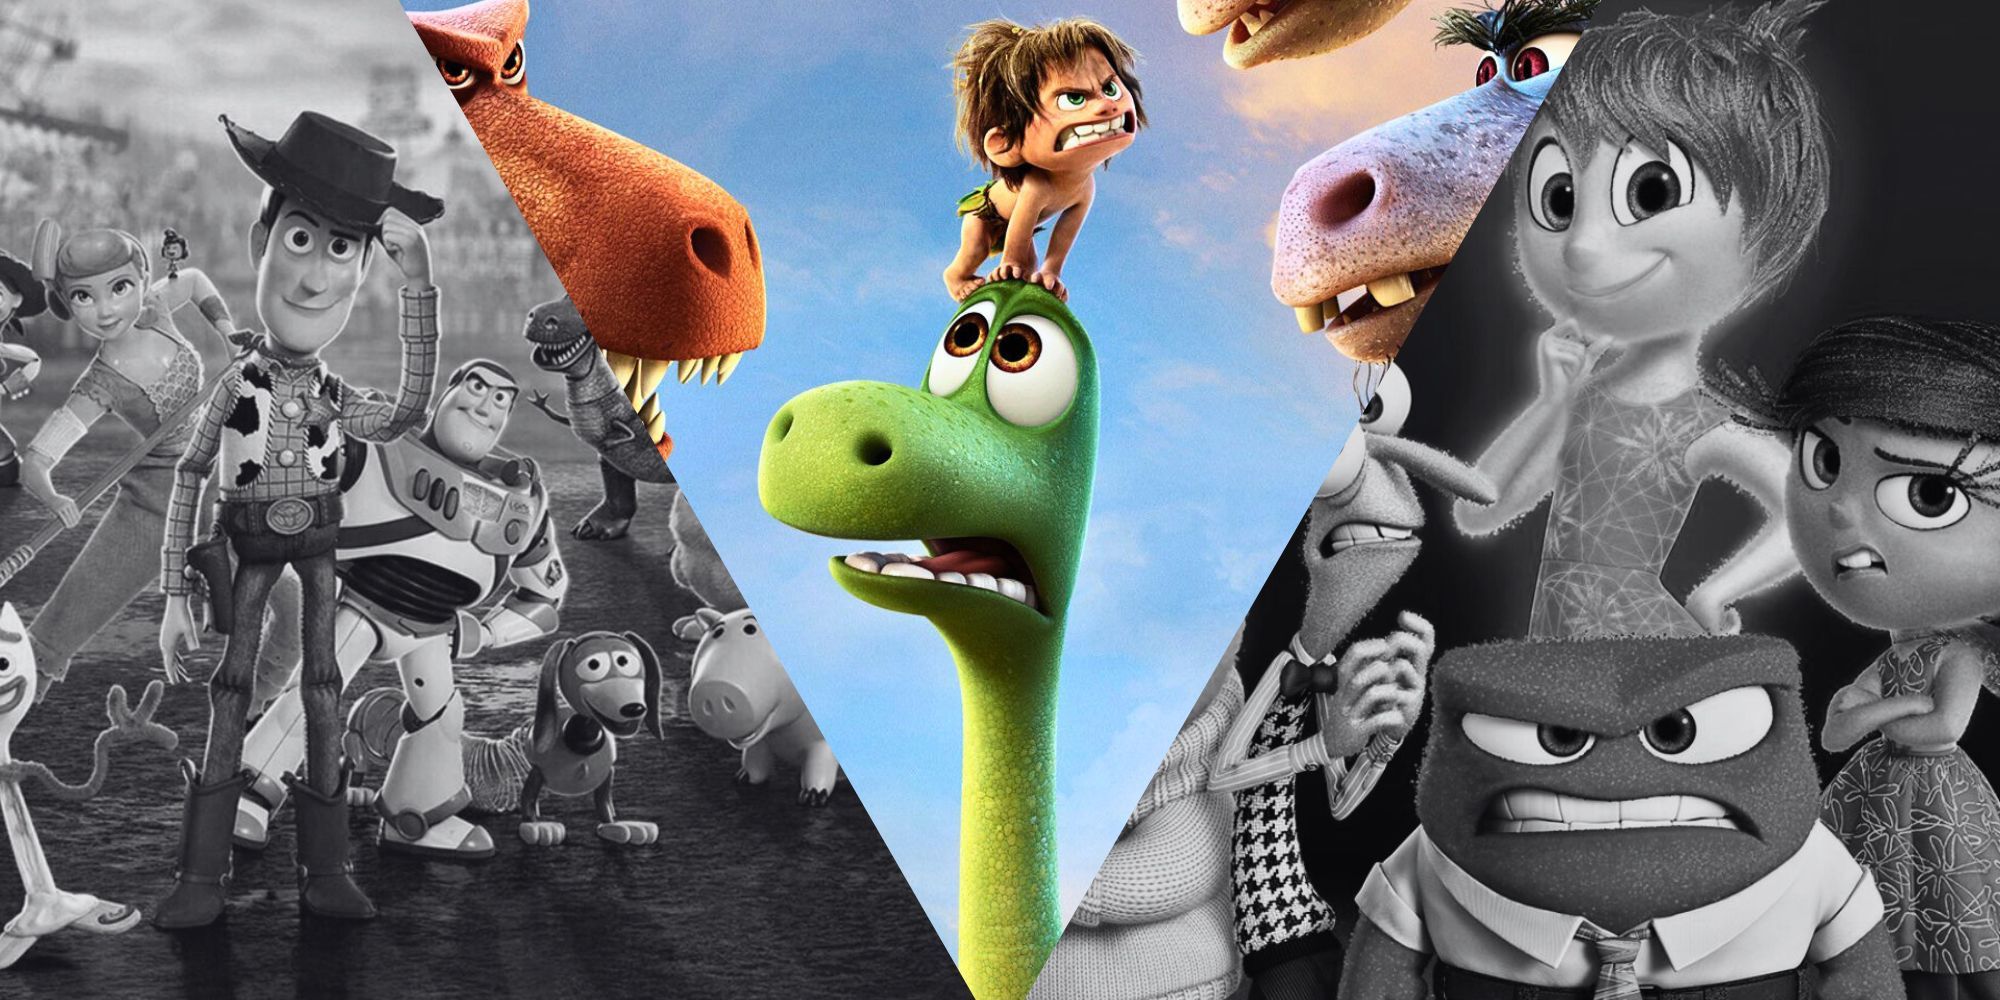 Characters from Toy Story, The Good Dinosaur, and Inside Out